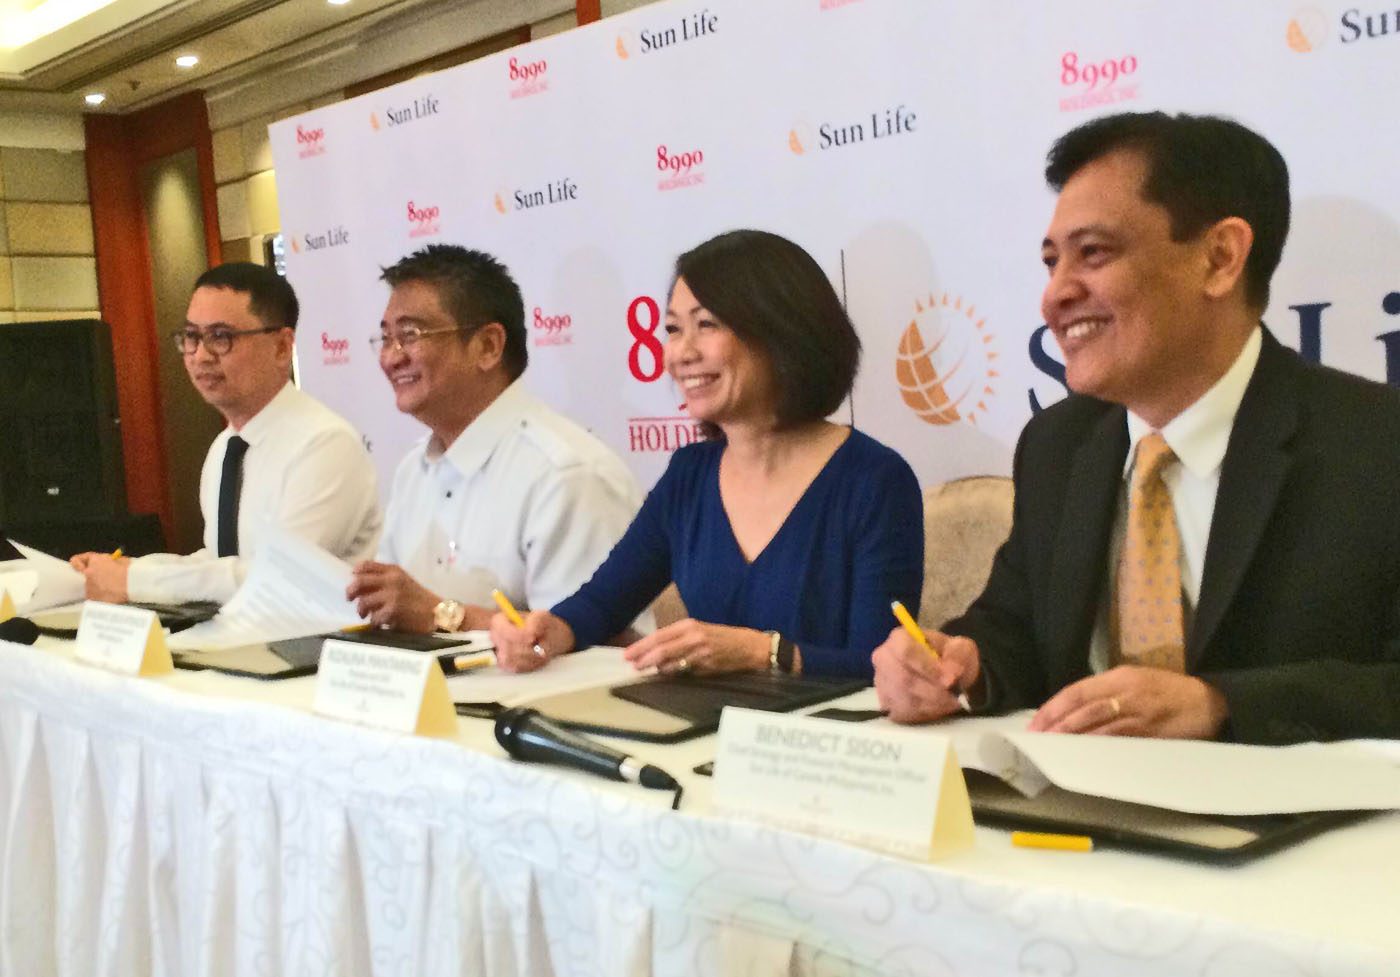 Sun Life, 8990 Holdings tie up to boost financial literacy